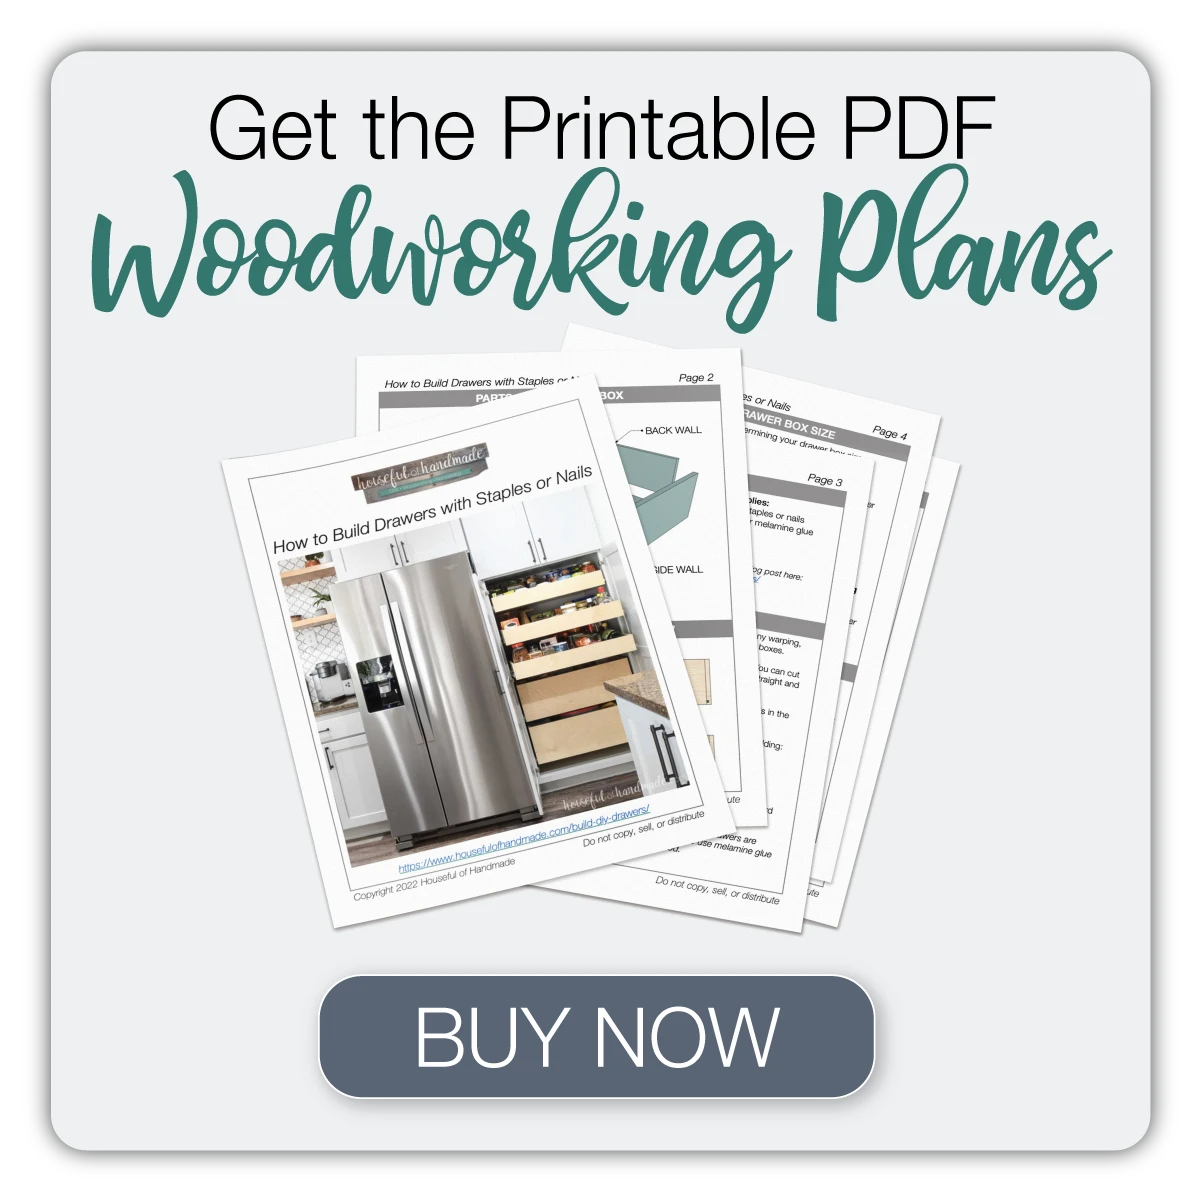 Button to buy the printable PDF woodworking plans for building drawers fast with nails or staples. 